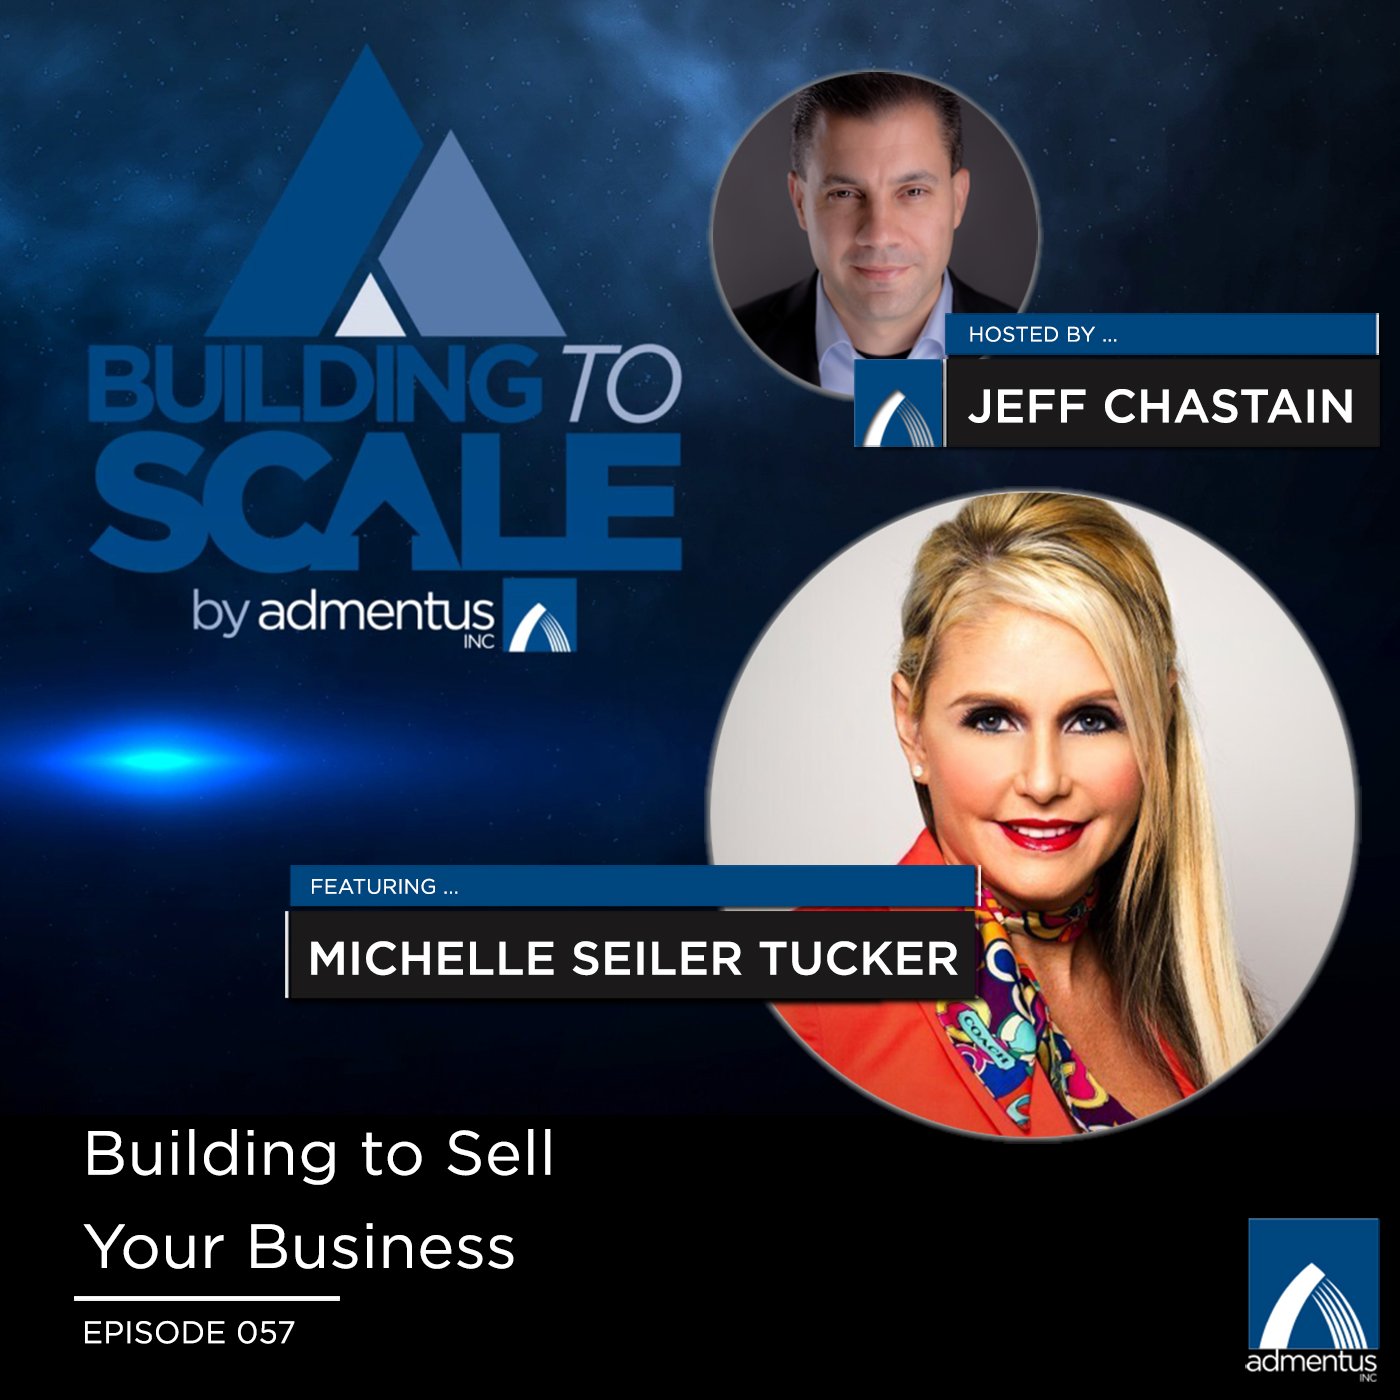 Building to Sell Your Business with Michelle Seiler Tucker